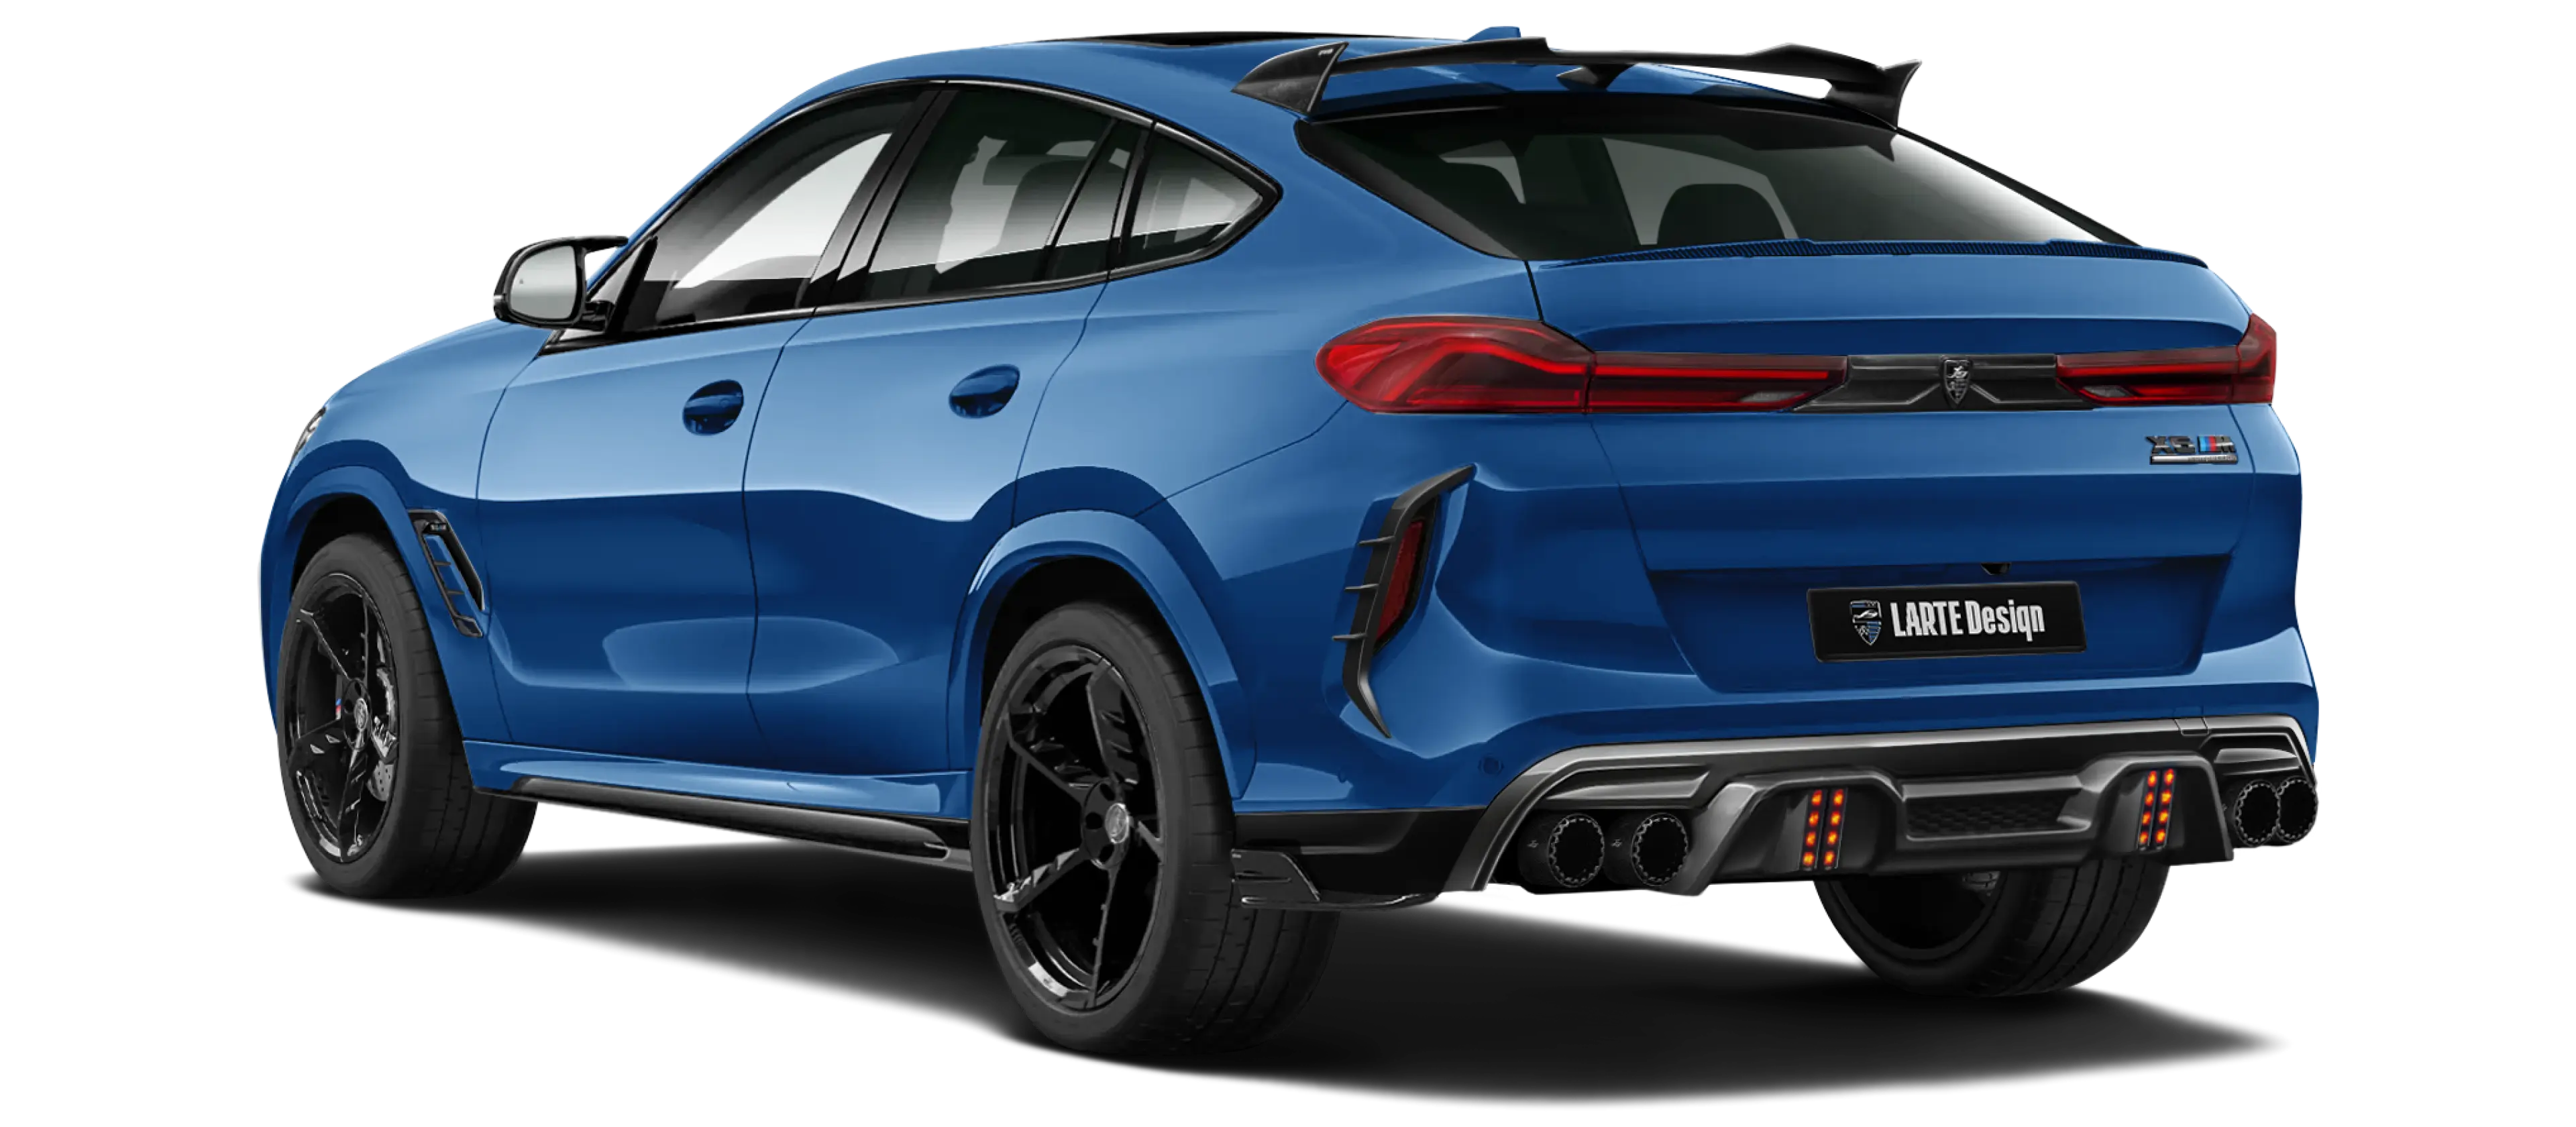 BMW X6M F96 LCI 2023 with painted body kit: rear view shown in Marina Bay